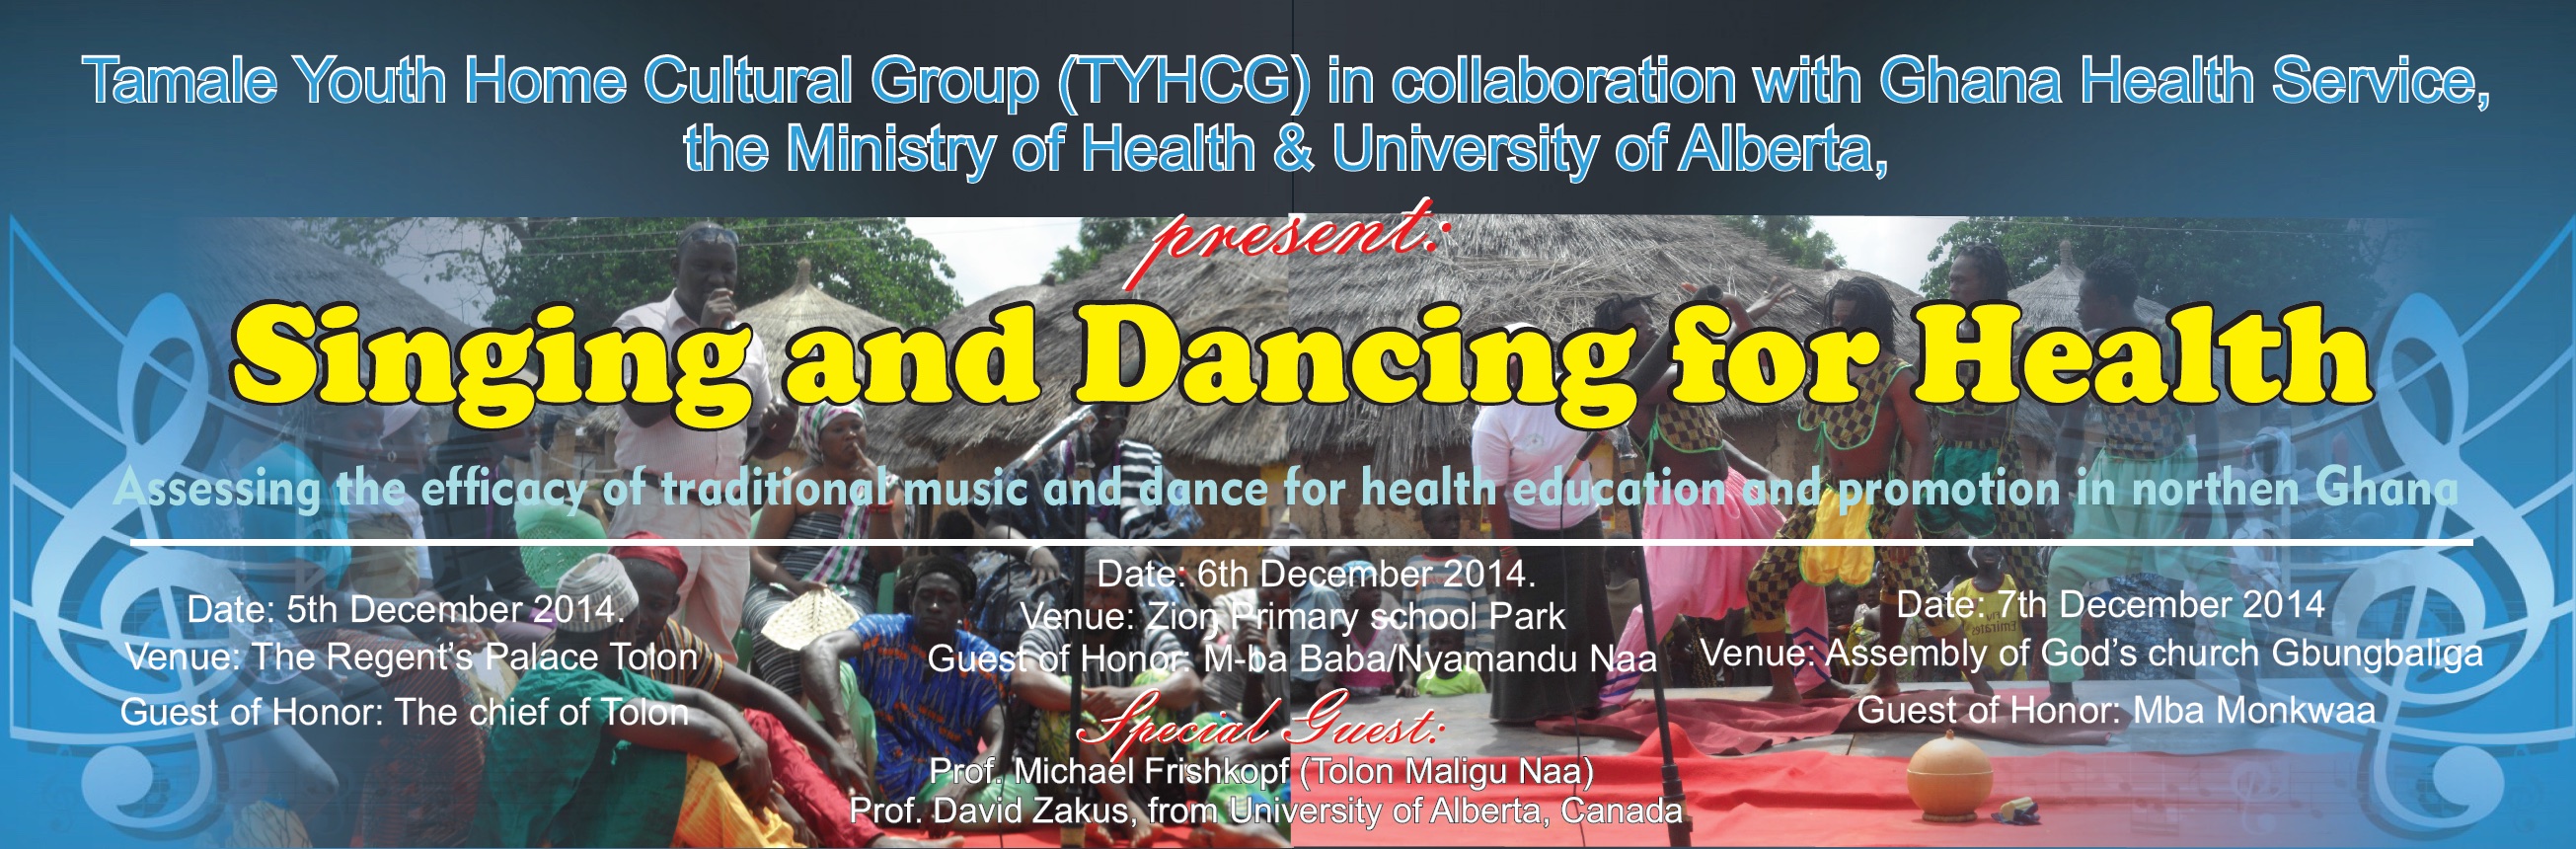 Singing and Dancing for Health